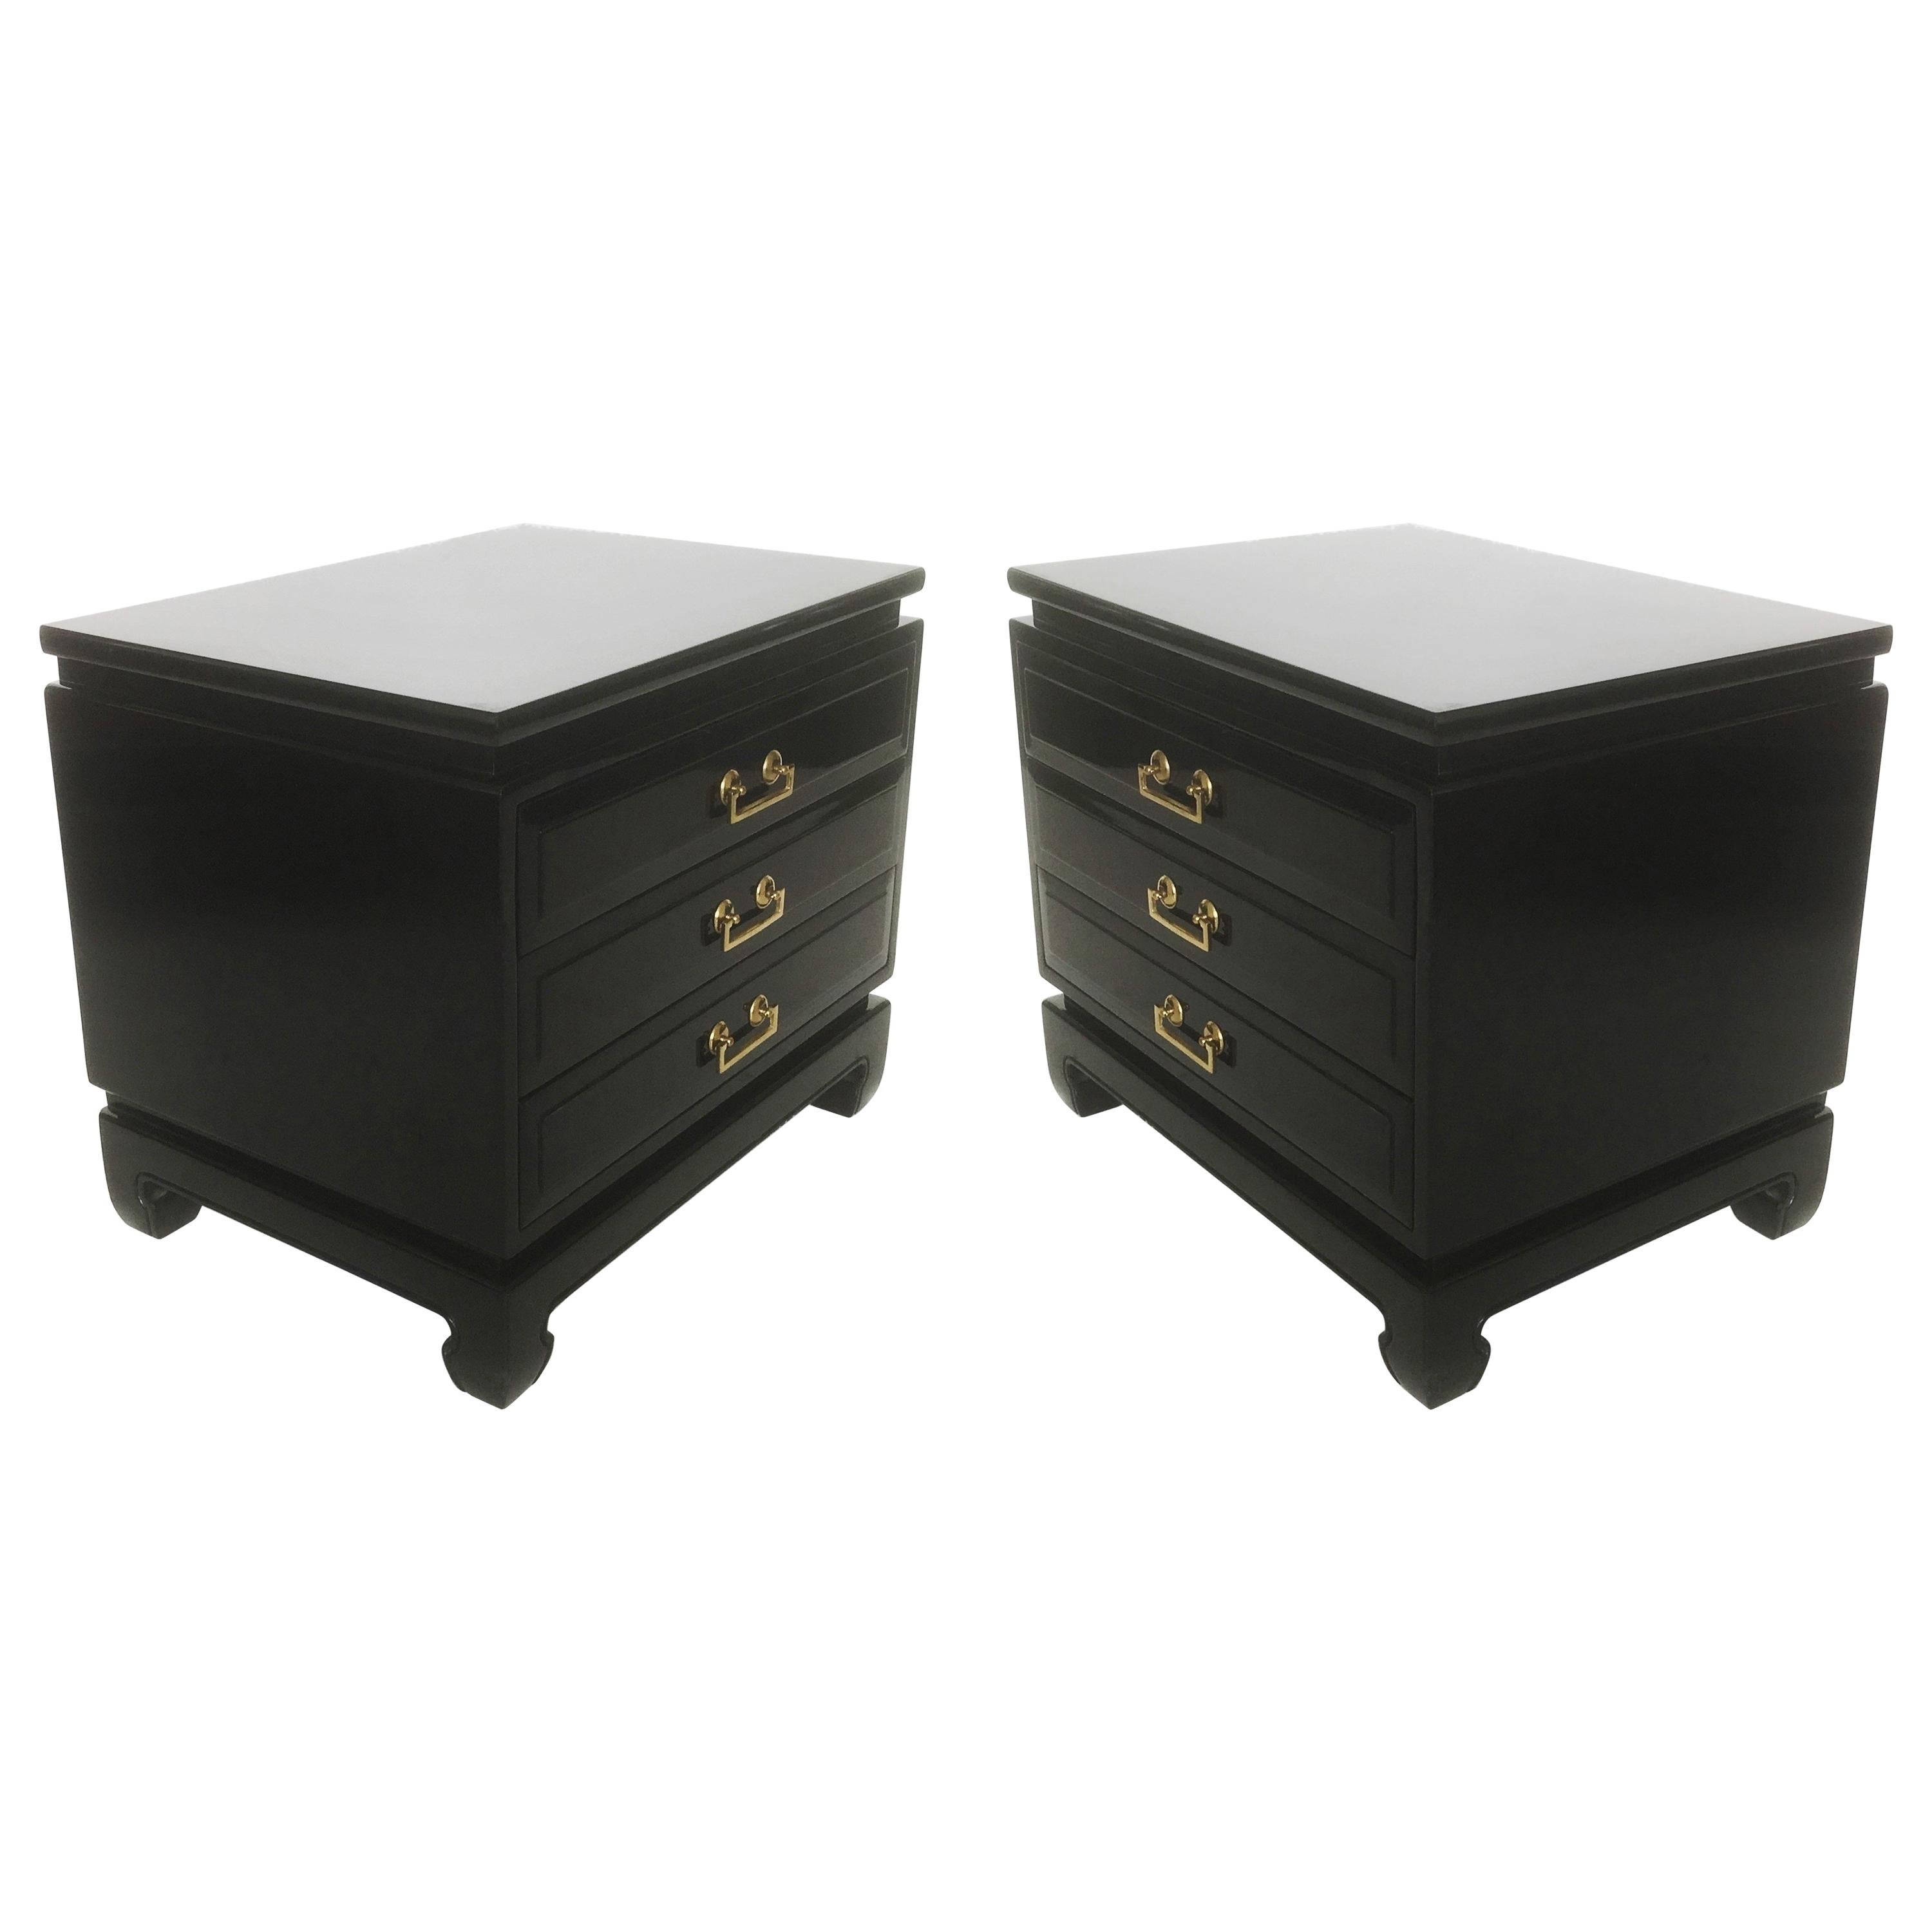 Pair of Midcentury Asian Style Lacquered Three-Drawer Chests